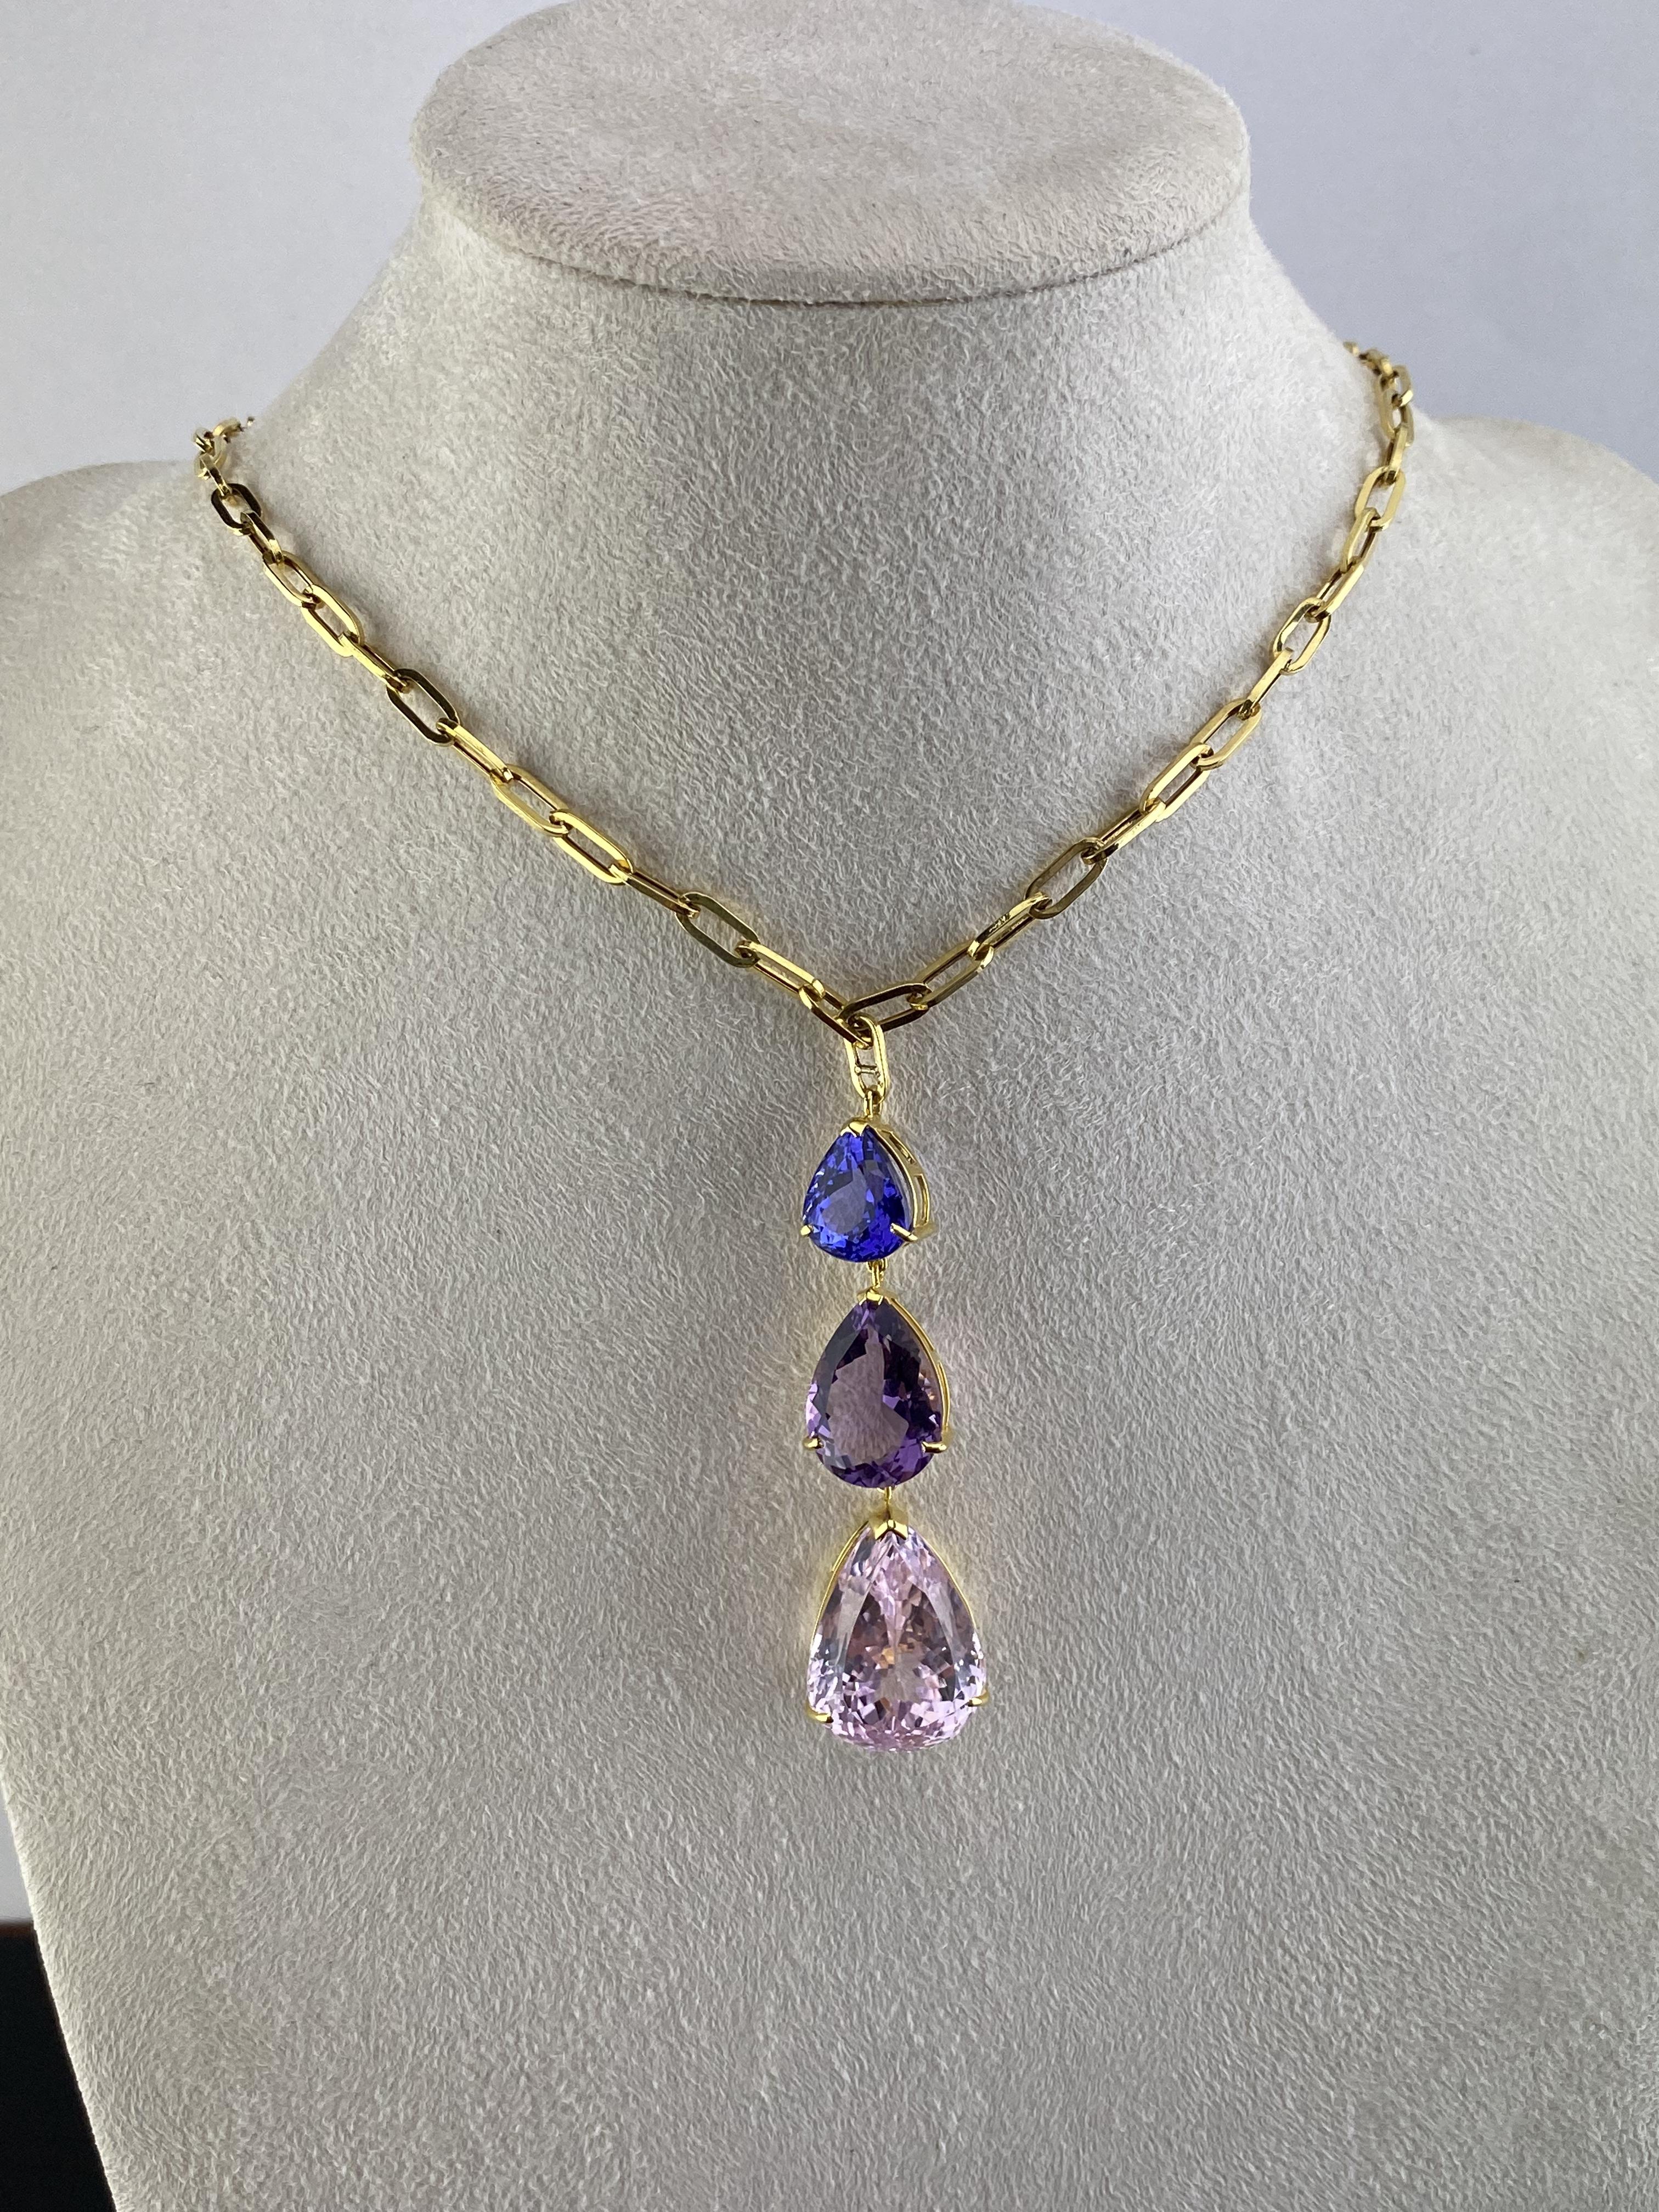 Purple Raindrop 47.50ctw Tanzanite, Amethyst, and Kunzite Three-Stone Pendant Necklace in 18k Yellow Gold

Exude undeniable elegance with this beautiful 3-stone pendant necklace, finely crafted in brightly polished 18k yellow gold. Hand-selected